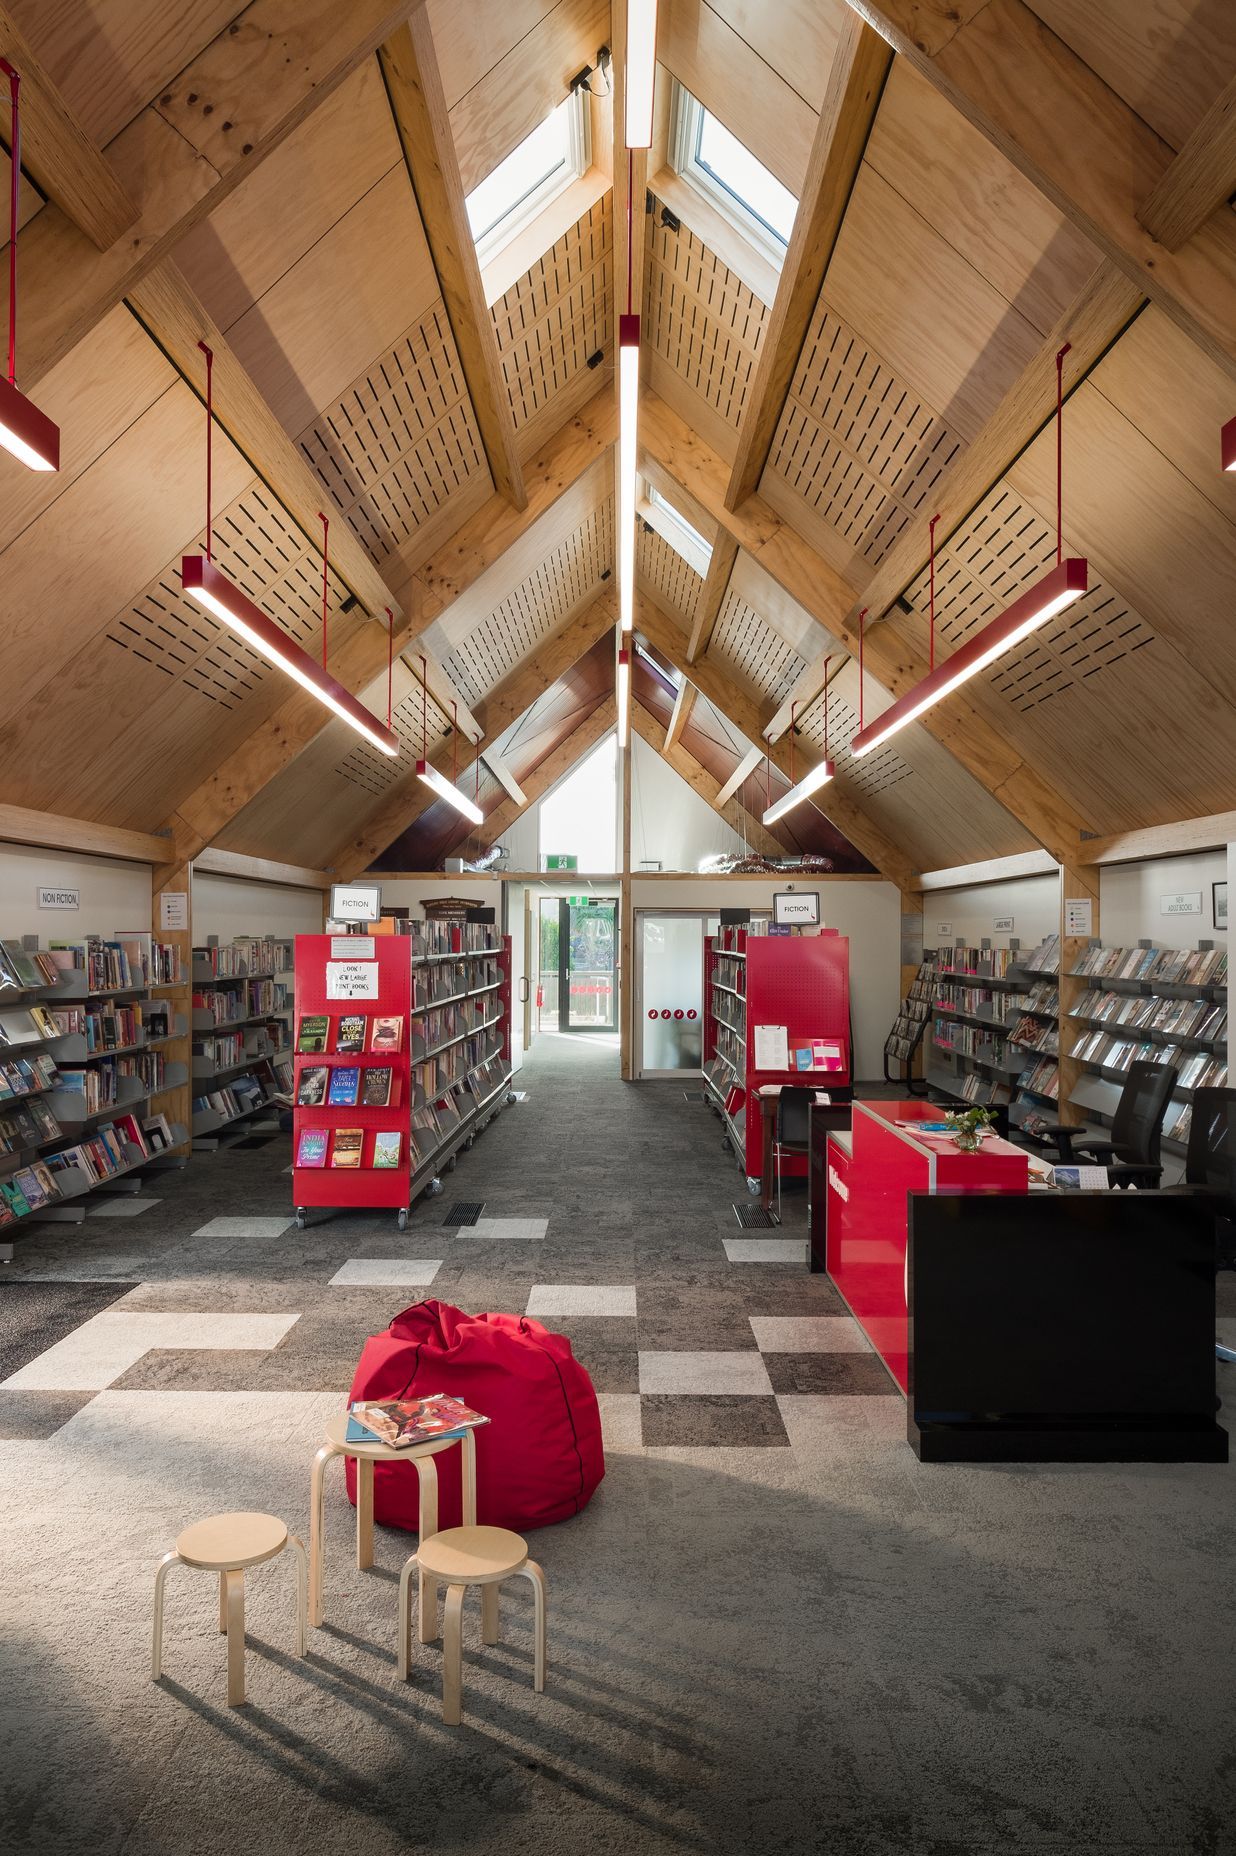 Redcliffs Library